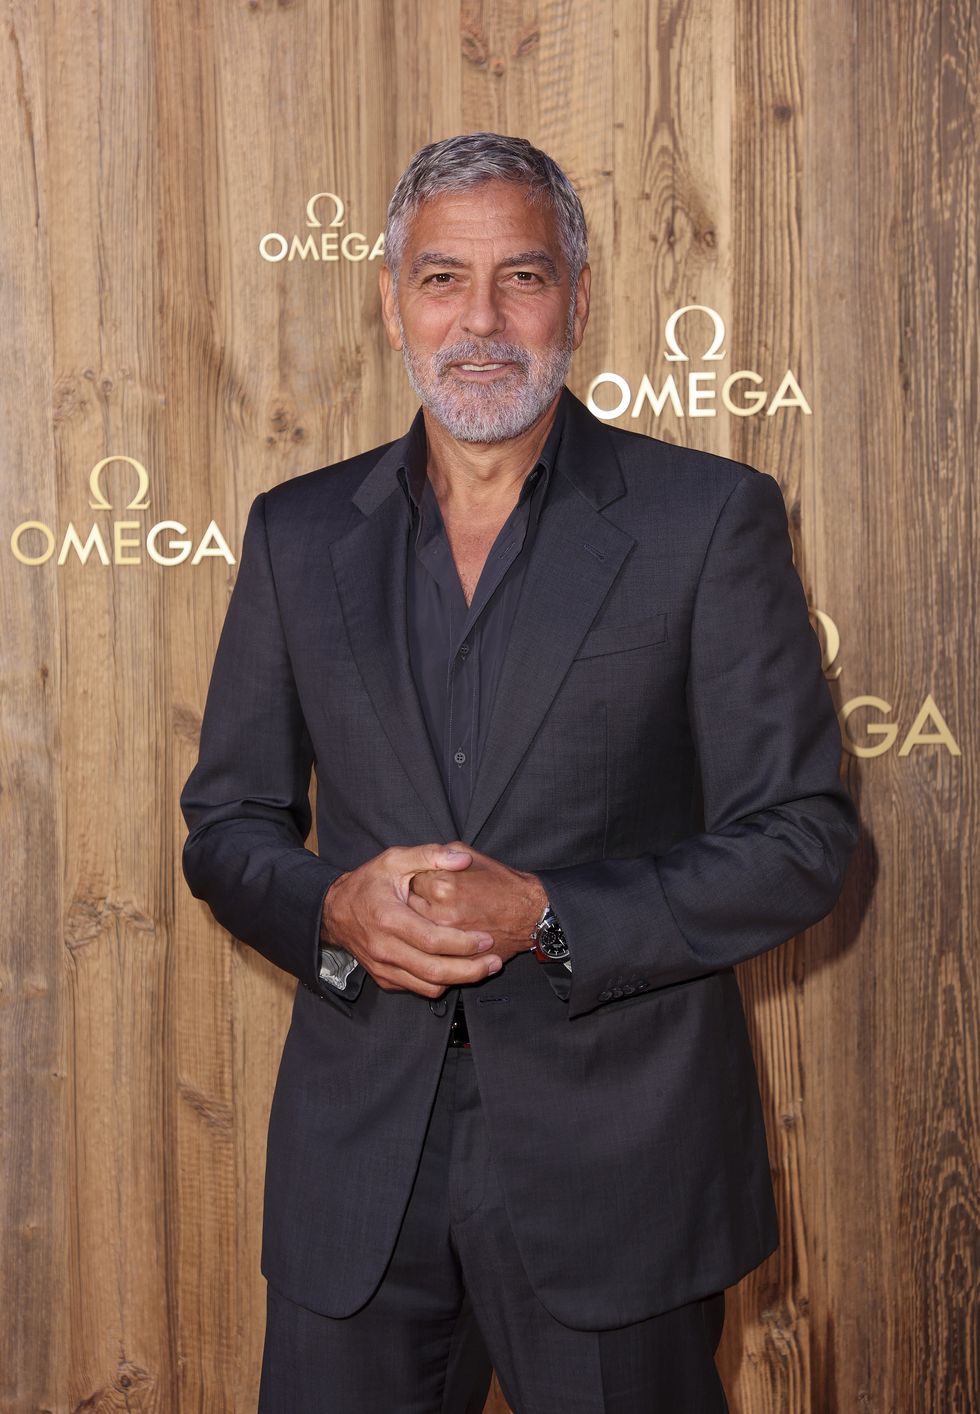 crans montana, switzerland august 27 george clooney attends gala evening at cry d’er part of the omega masters 2022 on august 27, 2022 in crans montana, switzerland photo by mike marslandgetty images for omega